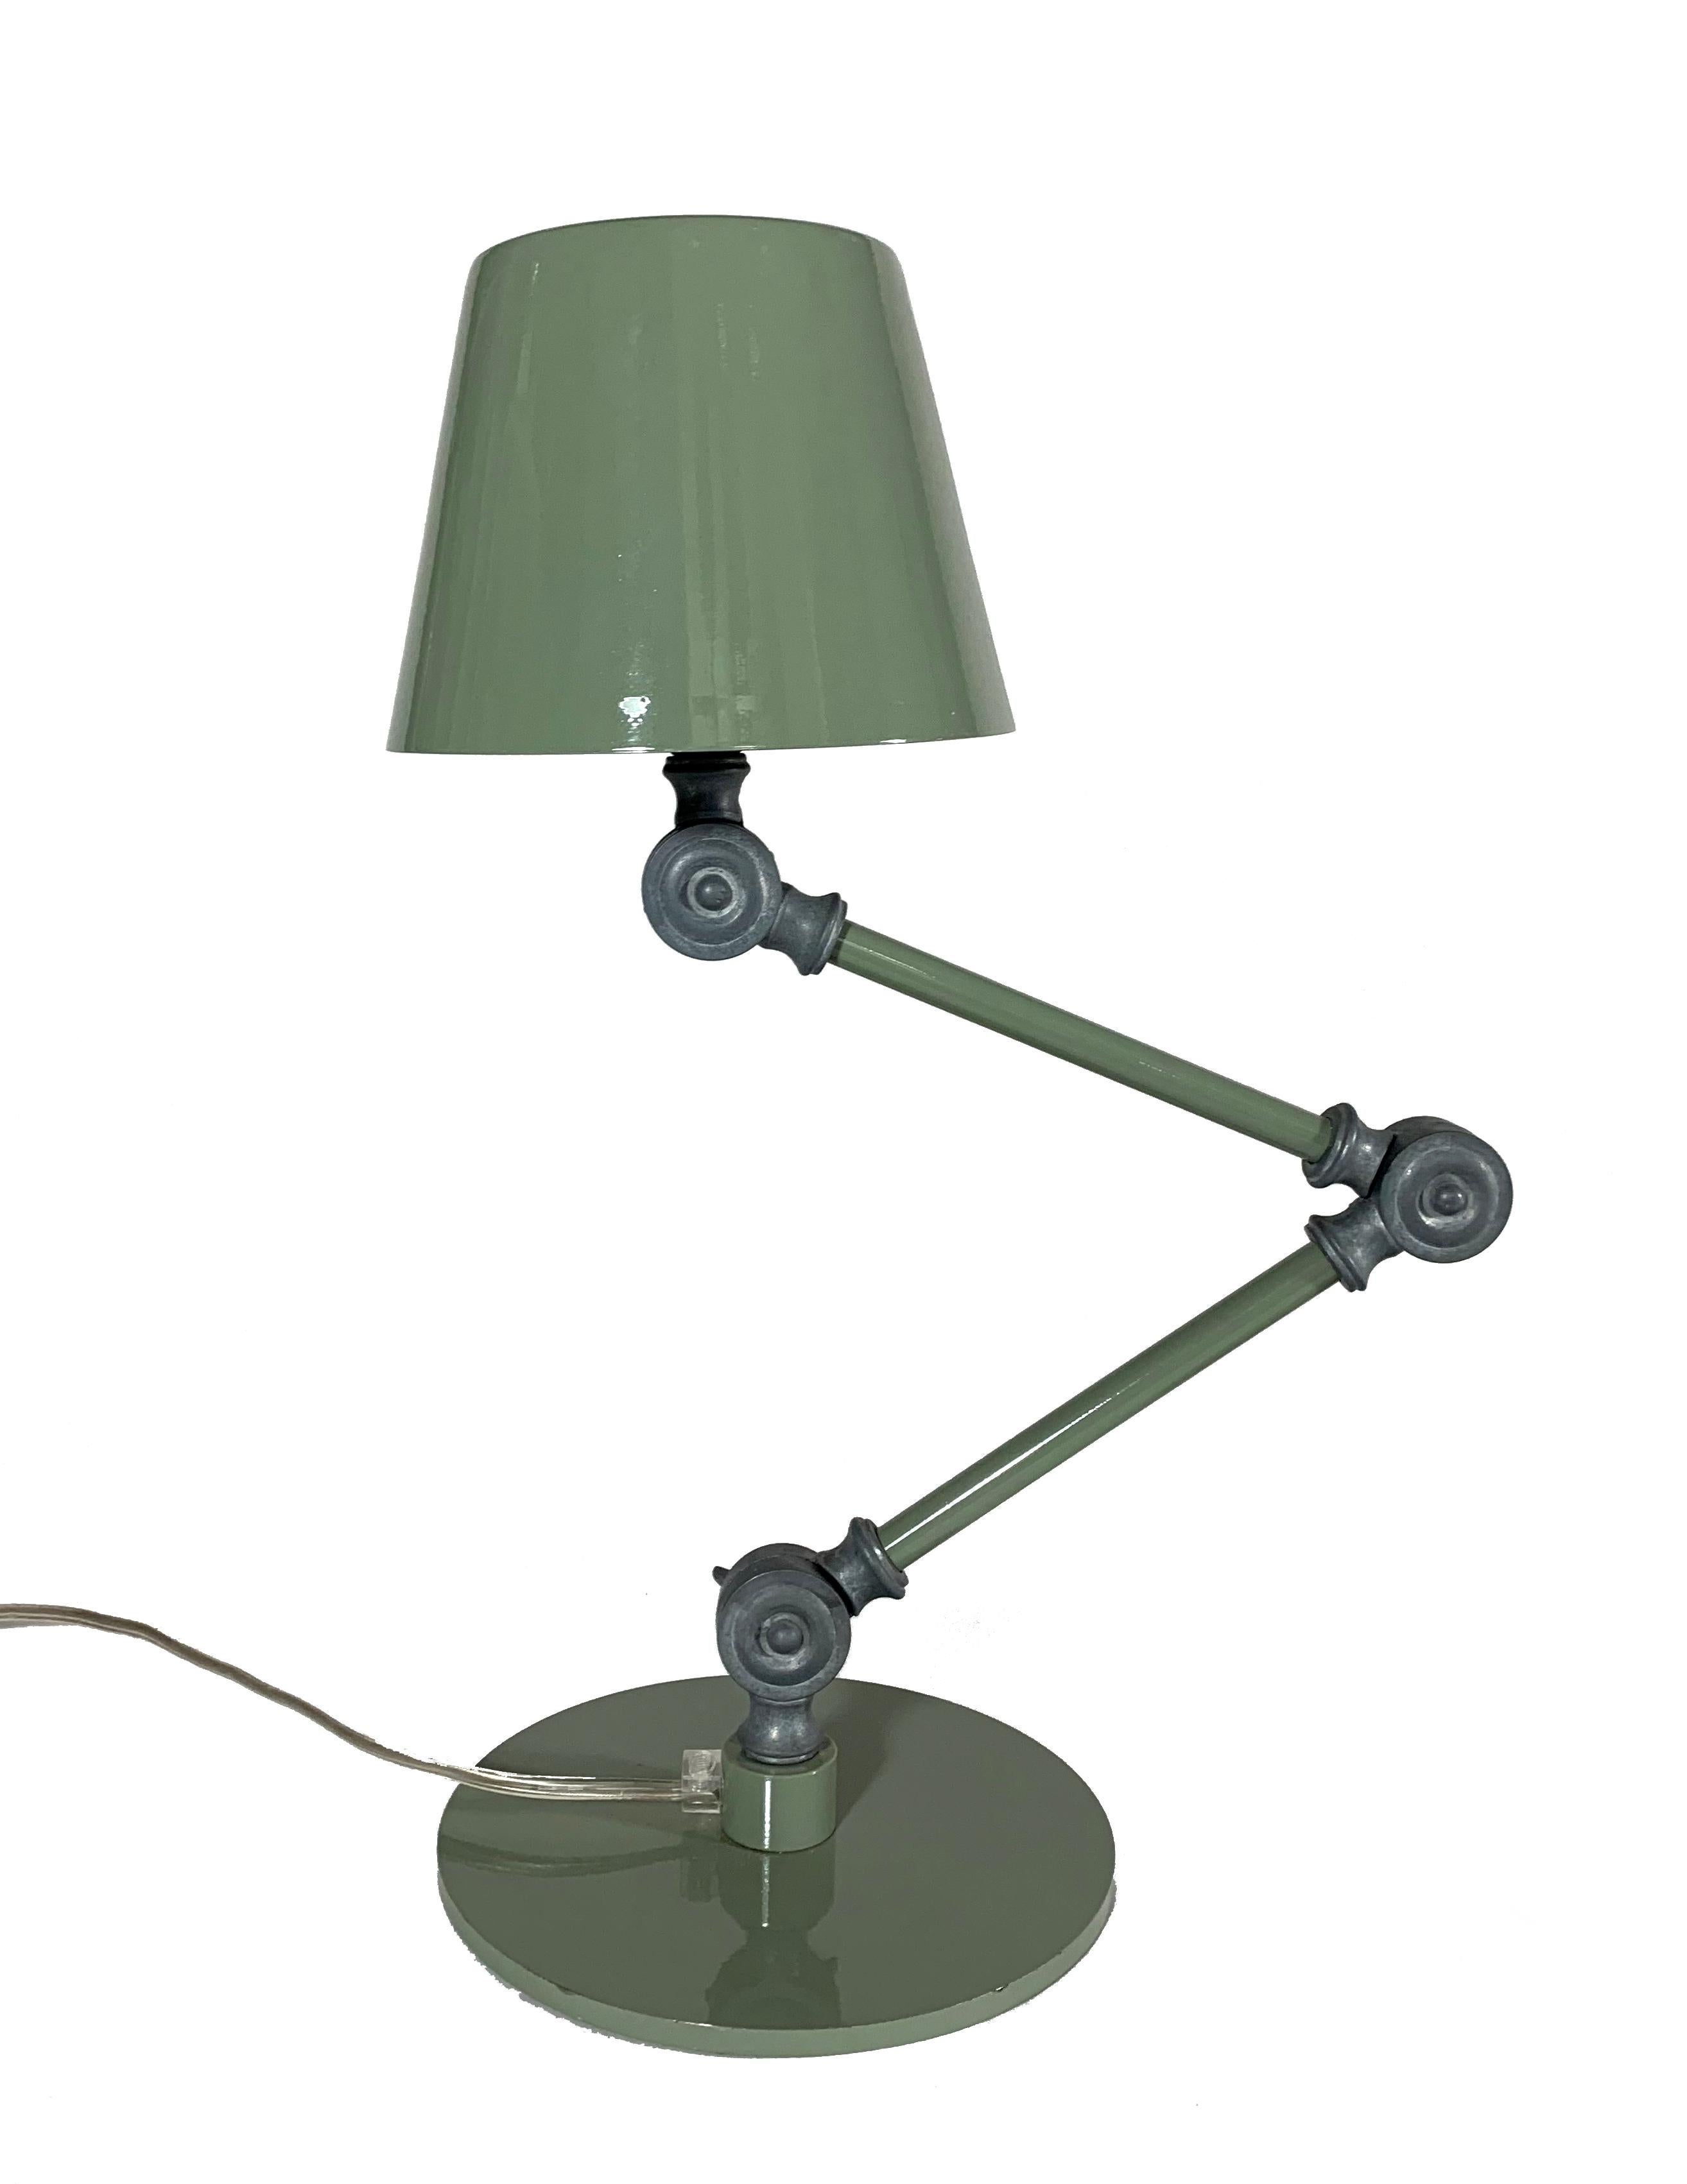 Adjustable table / accent lamp - single-section stem. Shown here in gloss military green. In-line switch on transparent cable. E14 lamp holder (bi-pin adapter available).
Made in Italy.